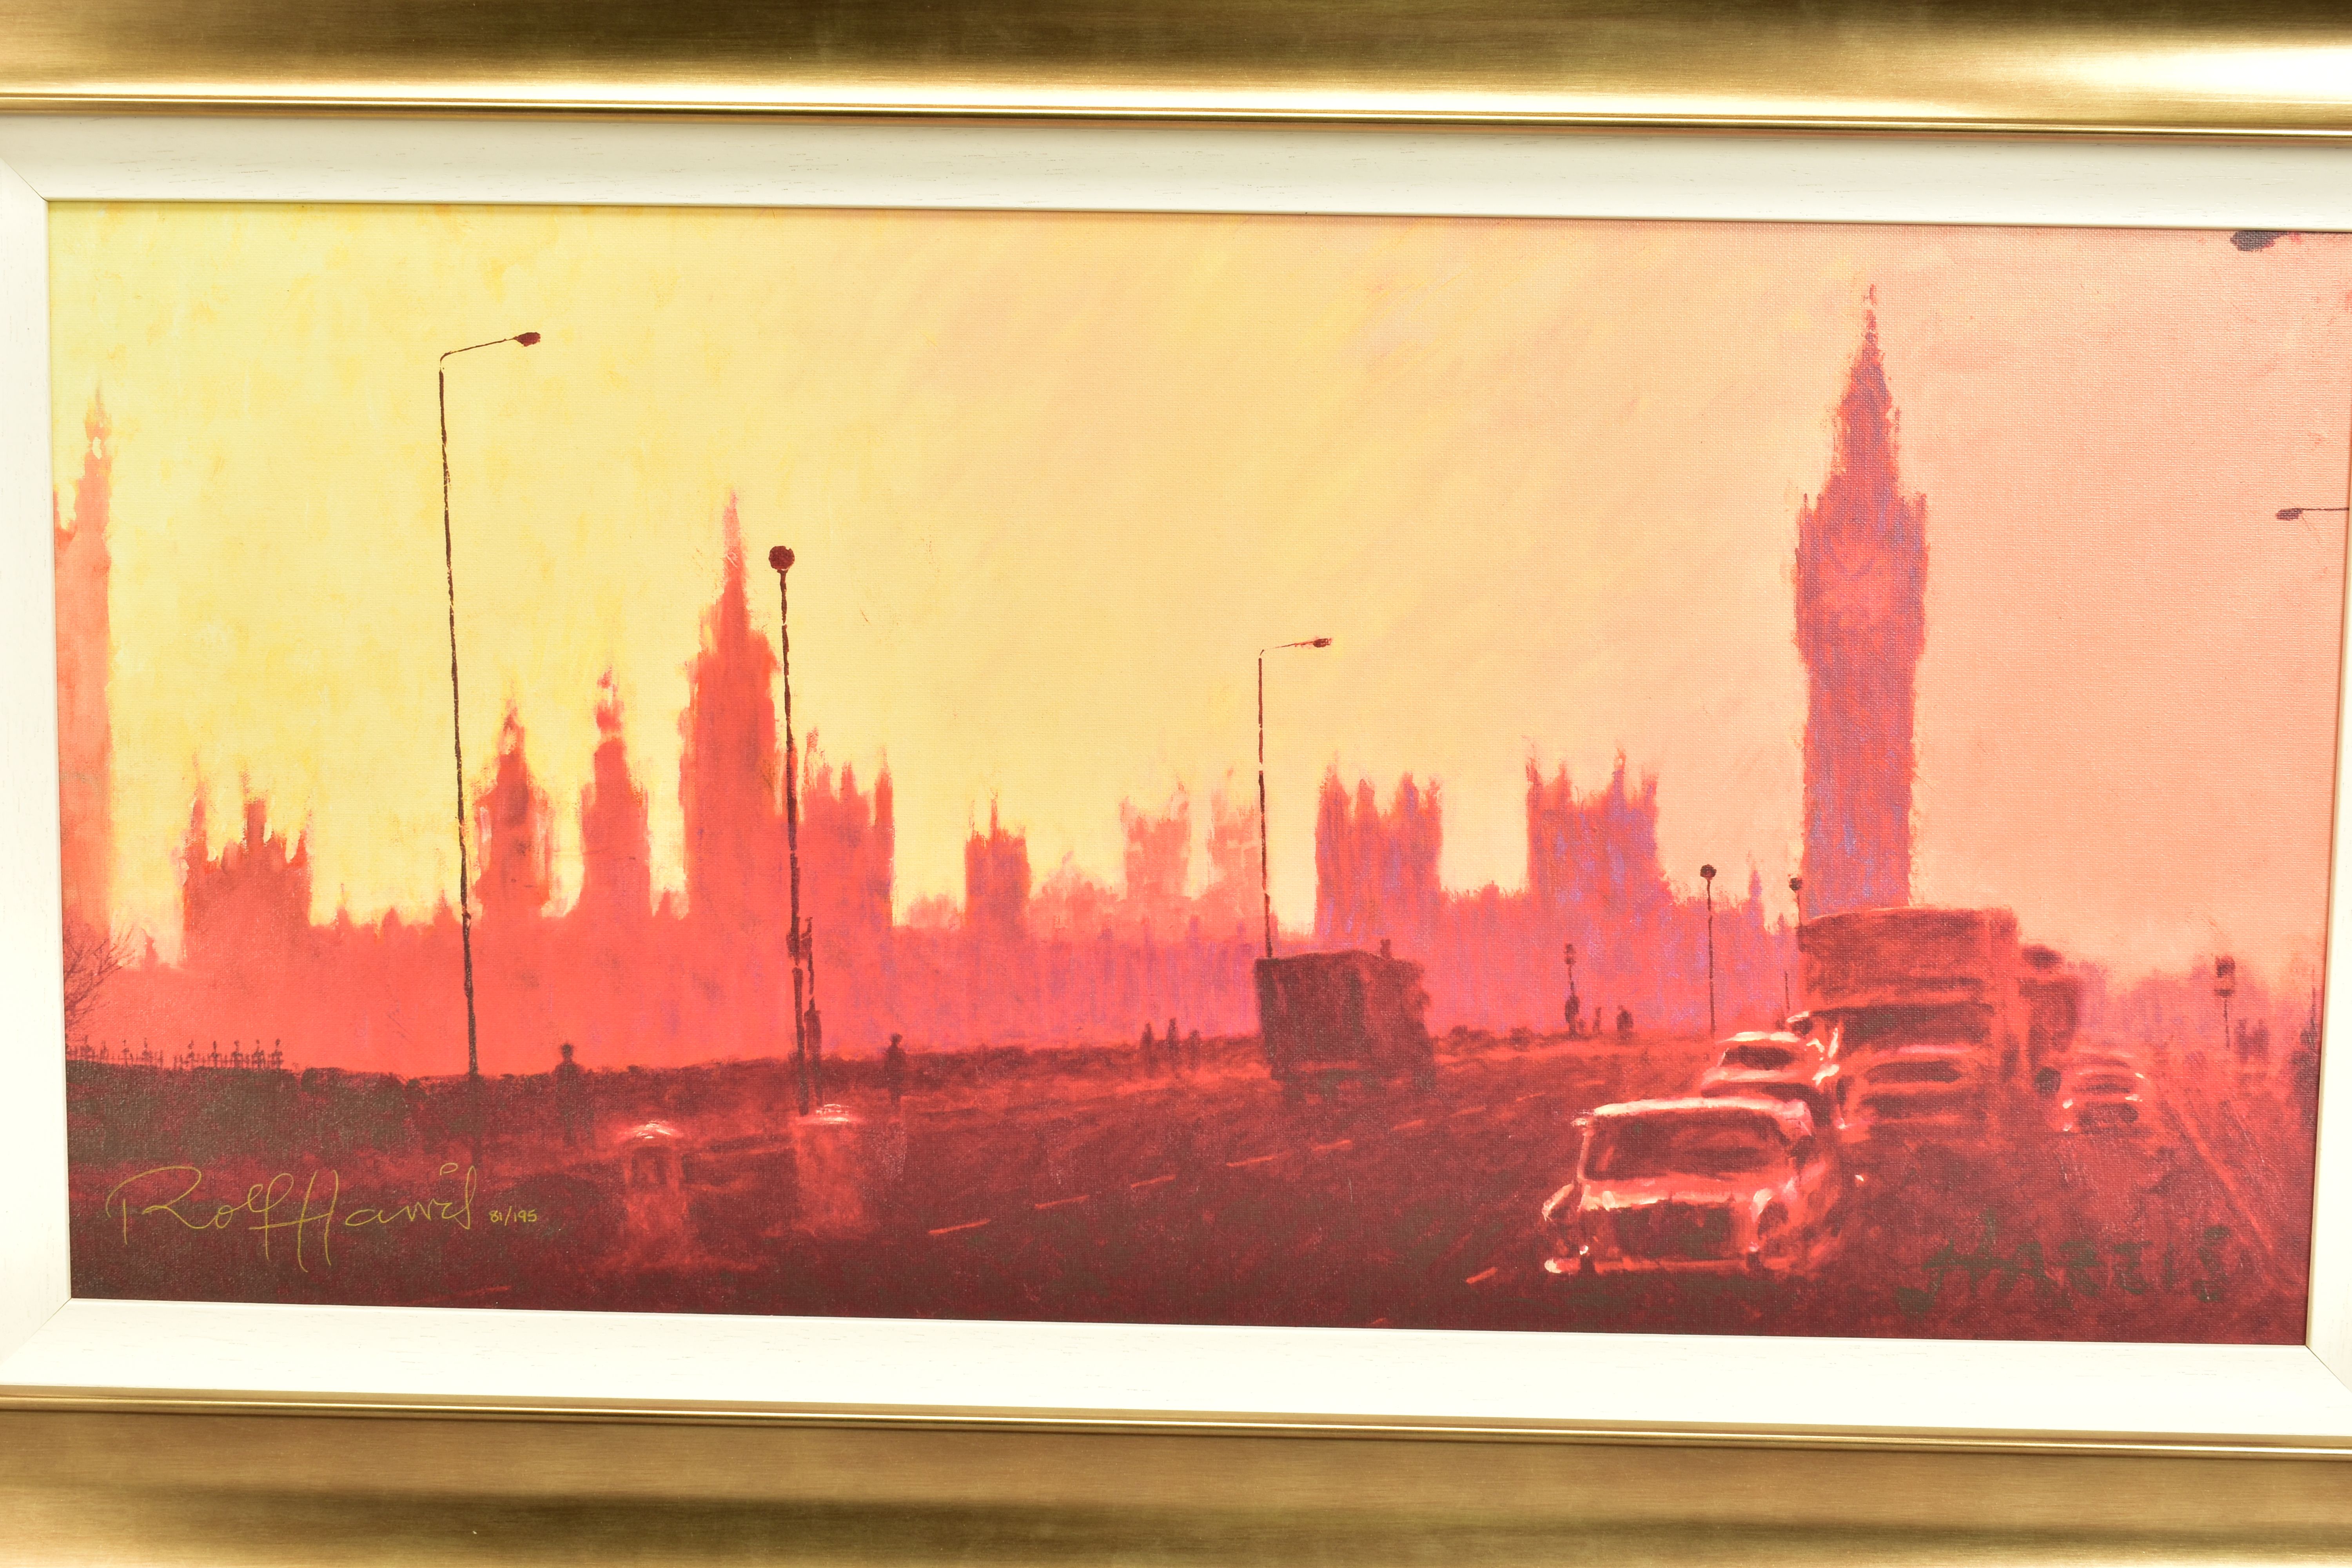 ROLF HARRIS (AUSTRALIA 1930) 'FIFTIES RUSH HOUR' a signed limited edition print of a nostalgic - Image 2 of 4